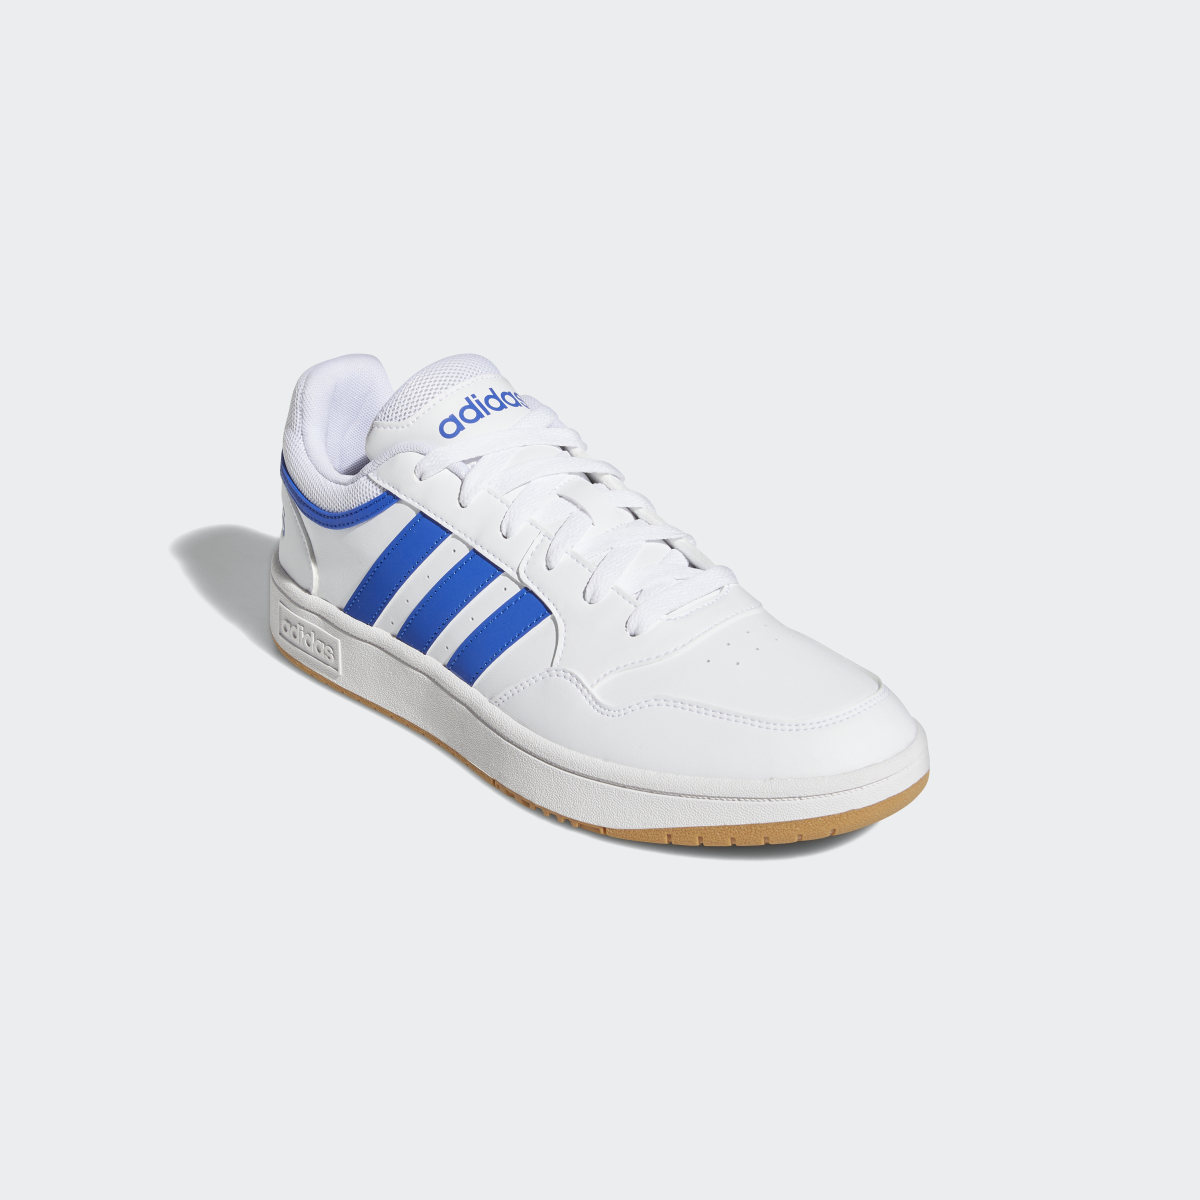 Adidas Chaussure Hoops 3.0 Low Classic Vintage. 5